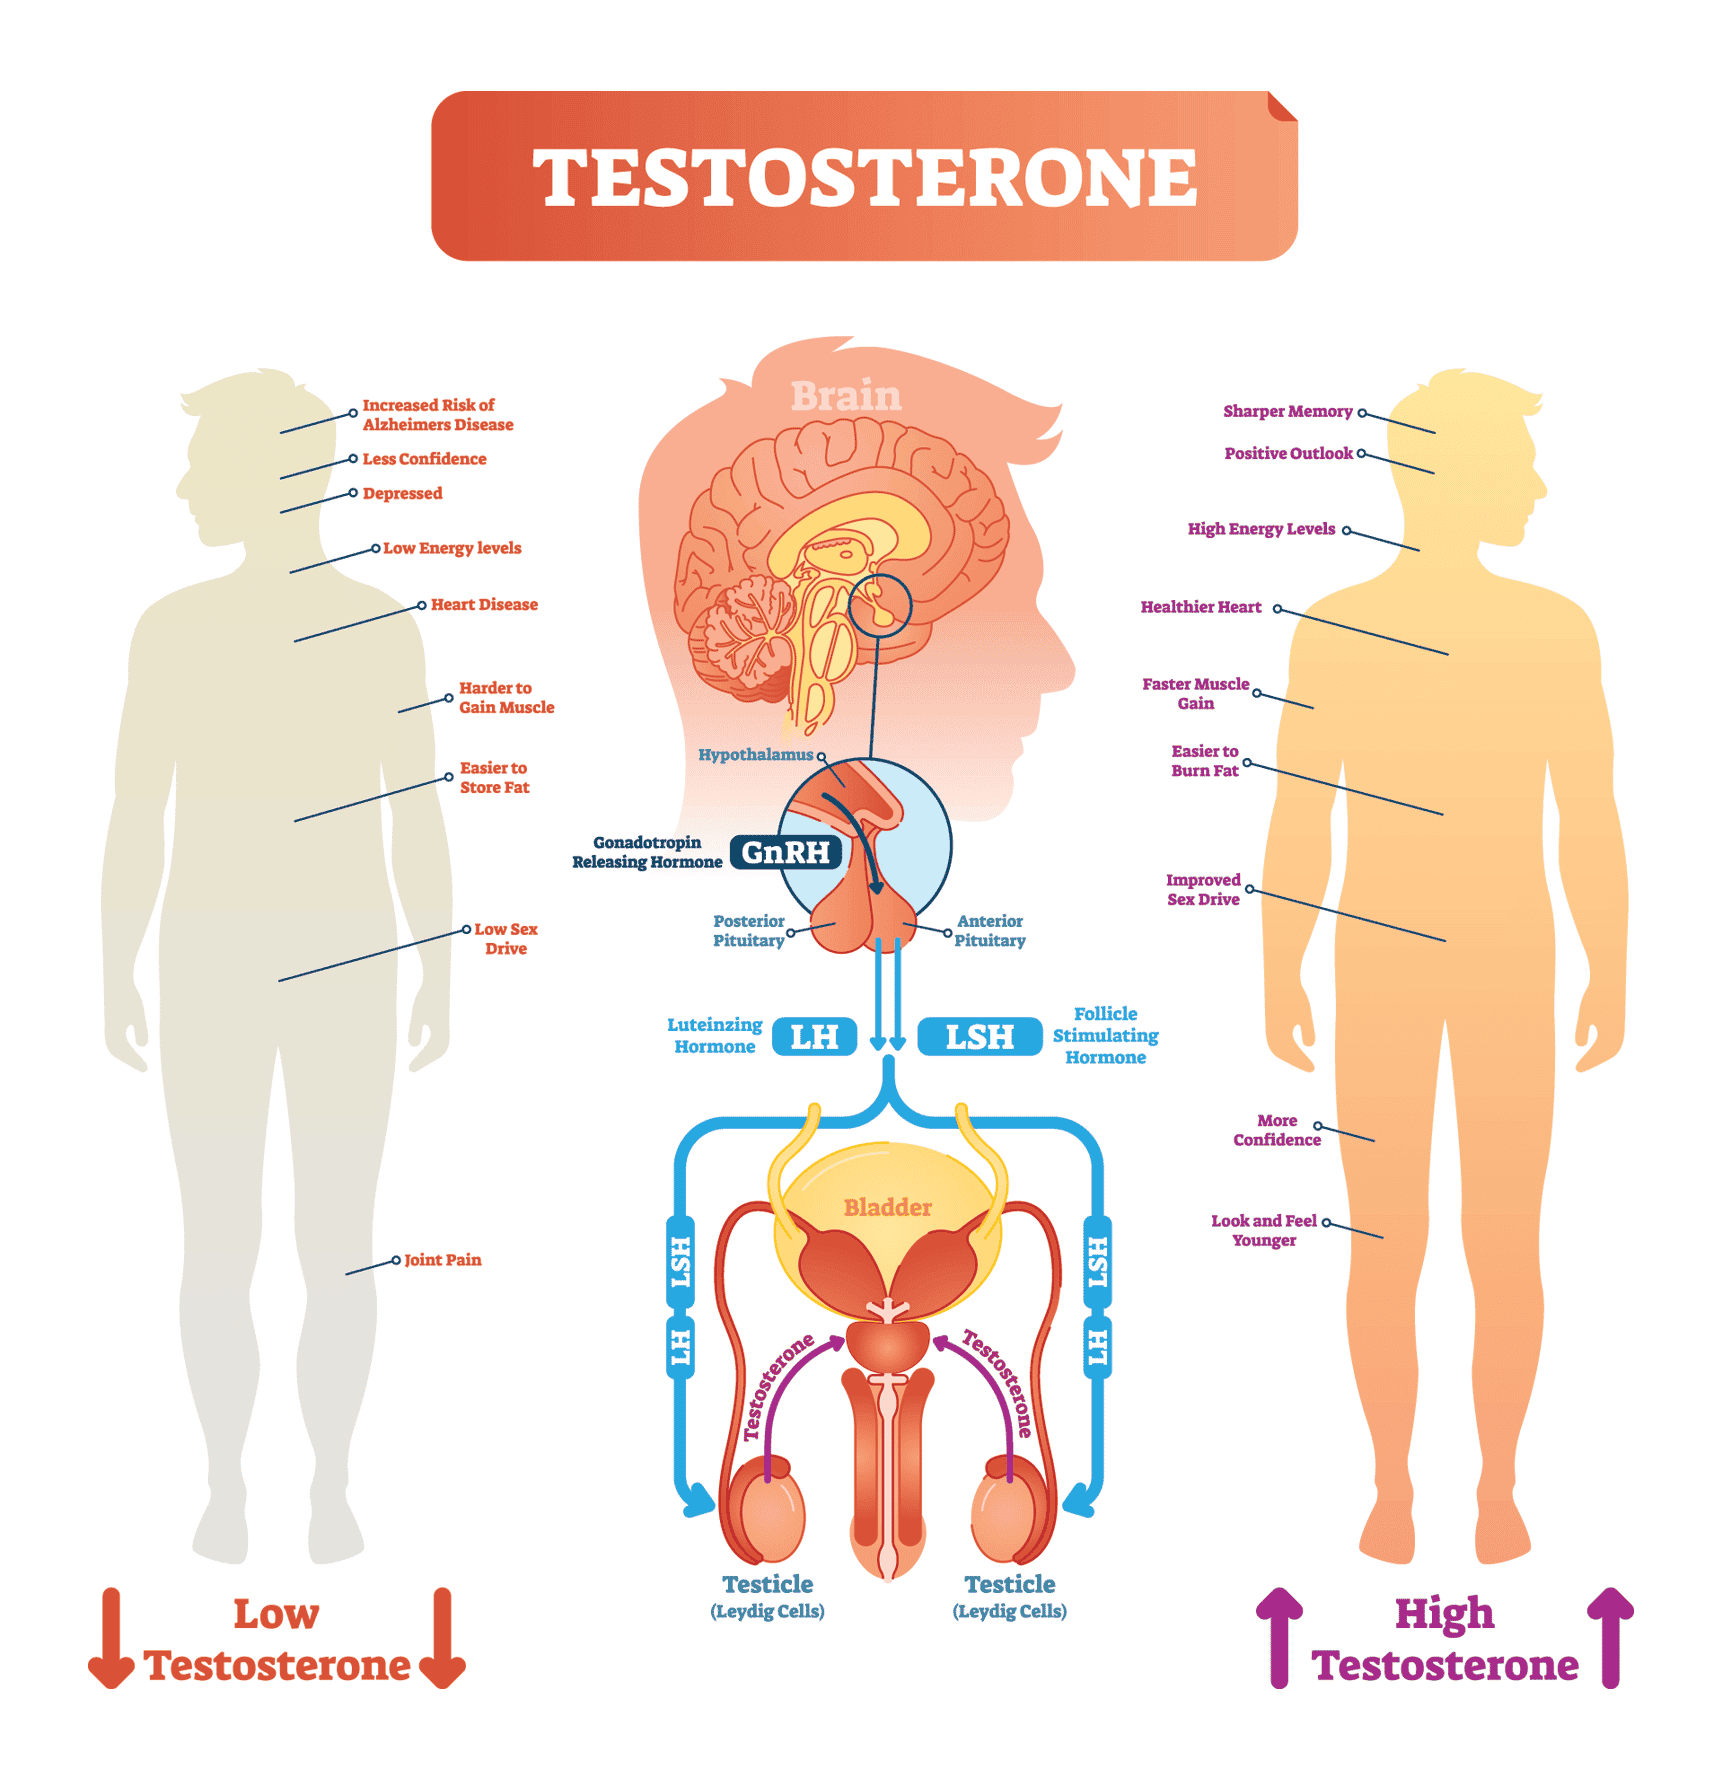 Testosterone anatomical and biological body diagram with brain and male reproductive organ cross sections.